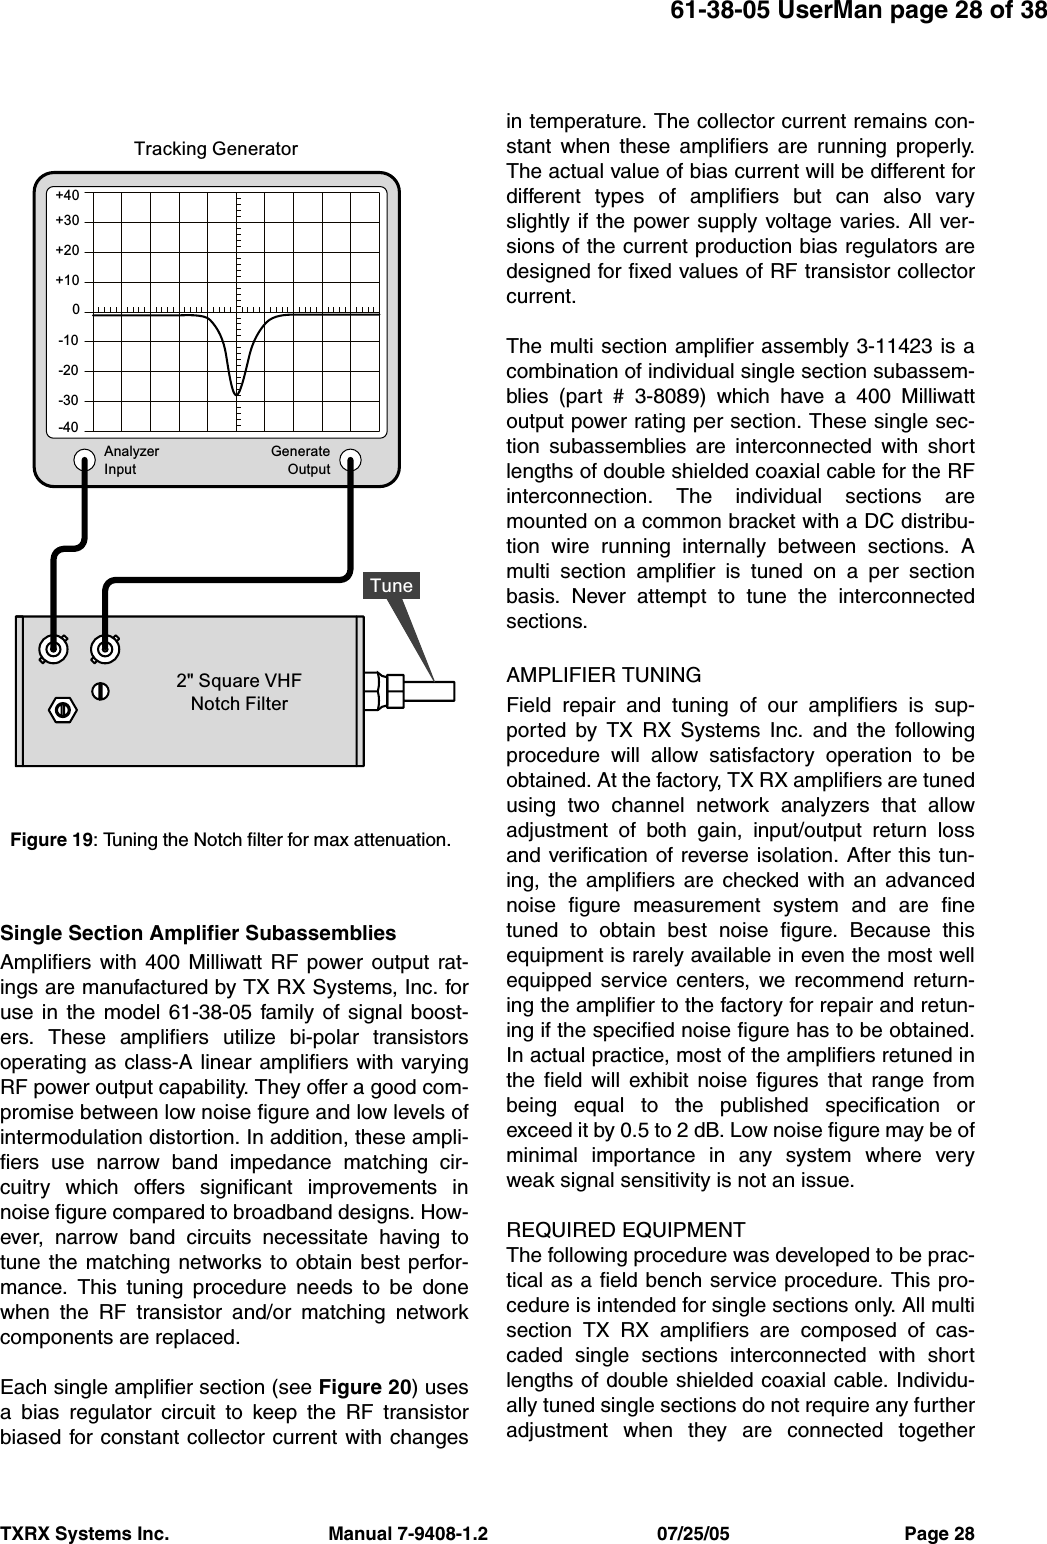 61-38-05 UserMan page 28 of 38TXRX Systems Inc.                               Manual 7-9408-1.2                                 07/25/05                                  Page 28Single Section Amplifier SubassembliesAmplifiers with 400 Milliwatt RF power output rat-ings are manufactured by TX RX Systems, Inc. foruse in the model 61-38-05 family of signal boost-ers. These amplifiers utilize bi-polar transistorsoperating as class-A linear amplifiers with varyingRF power output capability. They offer a good com-promise between low noise figure and low levels ofintermodulation distortion. In addition, these ampli-fiers use narrow band impedance matching cir-cuitry which offers significant improvements innoise figure compared to broadband designs. How-ever, narrow band circuits necessitate having totune the matching networks to obtain best perfor-mance. This tuning procedure needs to be donewhen the RF transistor and/or matching networkcomponents are replaced.Each single amplifier section (see Figure 20) usesa bias regulator circuit to keep the RF transistorbiased for constant collector current with changesin temperature. The collector current remains con-stant when these amplifiers are running properly.The actual value of bias current will be different fordifferent types of amplifiers but can also varyslightly if the power supply voltage varies. All ver-sions of the current production bias regulators aredesigned for fixed values of RF transistor collectorcurrent.The multi section amplifier assembly 3-11423 is acombination of individual single section subassem-blies (part # 3-8089) which have a 400 Milliwattoutput power rating per section. These single sec-tion subassemblies are interconnected with shortlengths of double shielded coaxial cable for the RFinterconnection. The individual sections aremounted on a common bracket with a DC distribu-tion wire running internally between sections. Amulti section amplifier is tuned on a per sectionbasis. Never attempt to tune the interconnectedsections.AMPLIFIER TUNINGField repair and tuning of our amplifiers is sup-ported by TX RX Systems Inc. and the followingprocedure will allow satisfactory operation to beobtained. At the factory, TX RX amplifiers are tunedusing two channel network analyzers that allowadjustment of both gain, input/output return lossand verification of reverse isolation. After this tun-ing, the amplifiers are checked with an advancednoise figure measurement system and are finetuned to obtain best noise figure. Because thisequipment is rarely available in even the most wellequipped service centers, we recommend return-ing the amplifier to the factory for repair and retun-ing if the specified noise figure has to be obtained.In actual practice, most of the amplifiers retuned inthe field will exhibit noise figures that range frombeing equal to the published specification orexceed it by 0.5 to 2 dB. Low noise figure may be ofminimal importance in any system where veryweak signal sensitivity is not an issue.REQUIRED EQUIPMENTThe following procedure was developed to be prac-tical as a field bench service procedure. This pro-cedure is intended for single sections only. All multisection TX RX amplifiers are composed of cas-caded single sections interconnected with shortlengths of double shielded coaxial cable. Individu-ally tuned single sections do not require any furtheradjustment when they are connected togetherAnalyzerInputGenerateOutput+30+40+20+100-10-20-30-402&quot; Square VHFNotch FilterTracking GeneratorTuneFigure 19: Tuning the Notch filter for max attenuation.